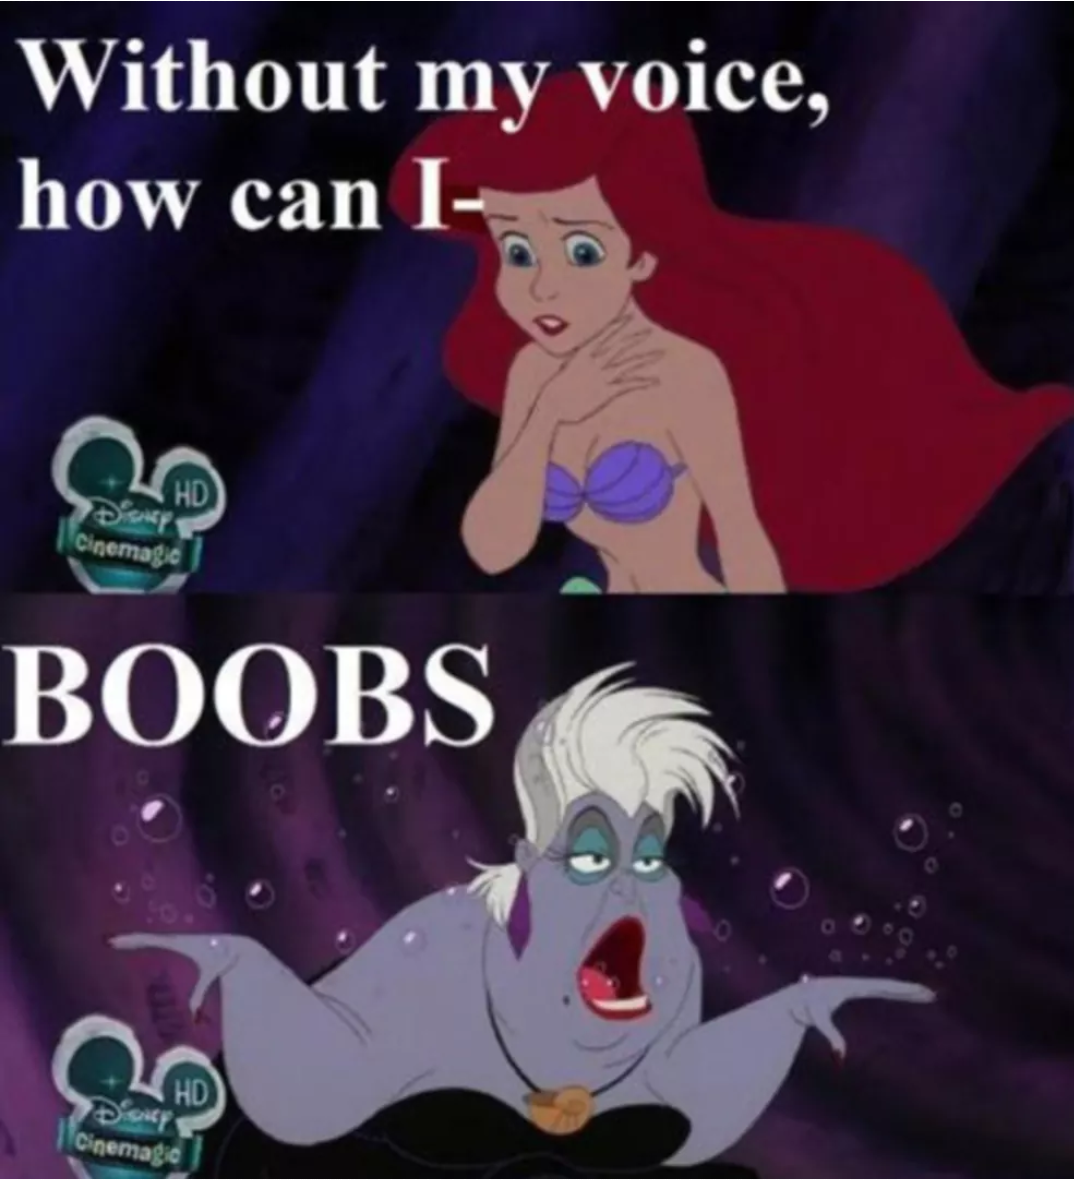 funny disney - Without my voice, how can I Cinema Boobs Cremago